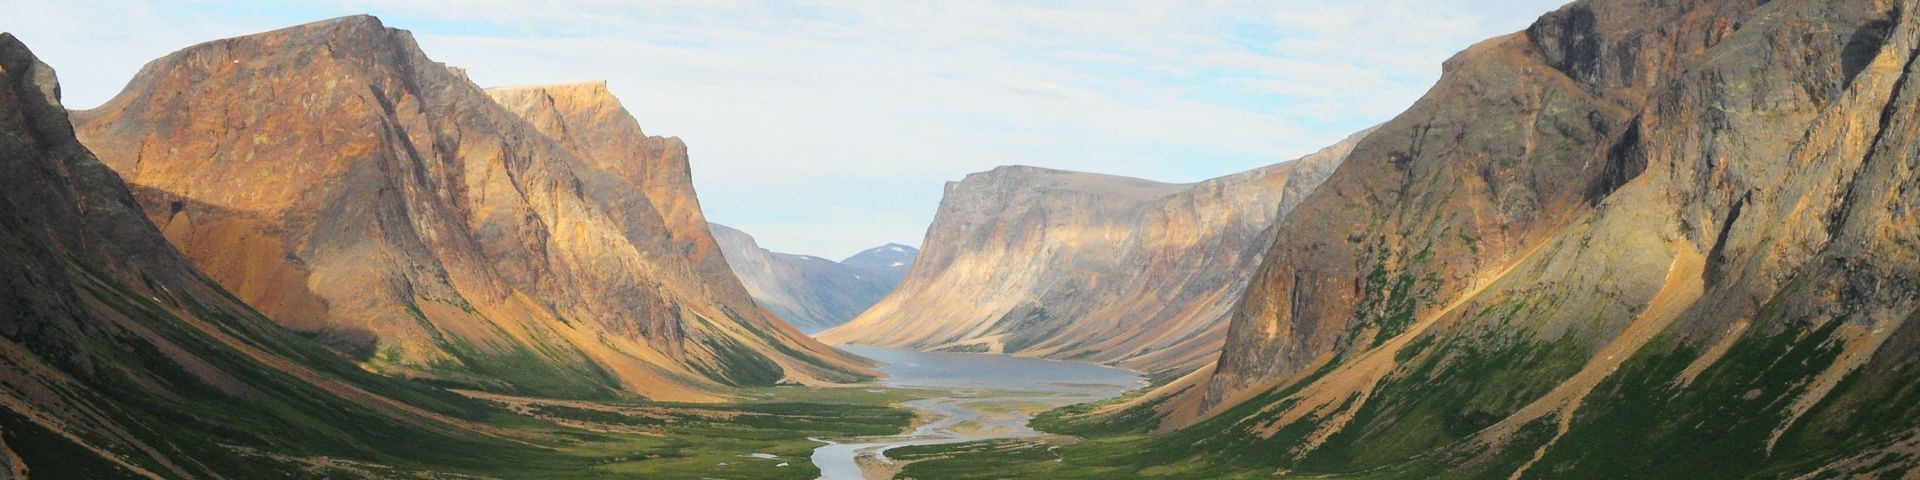 A view of a valley with a river going through some mountains in Tongait KakKasuangita SilakKijapvinga-Torngat Mountains National Park